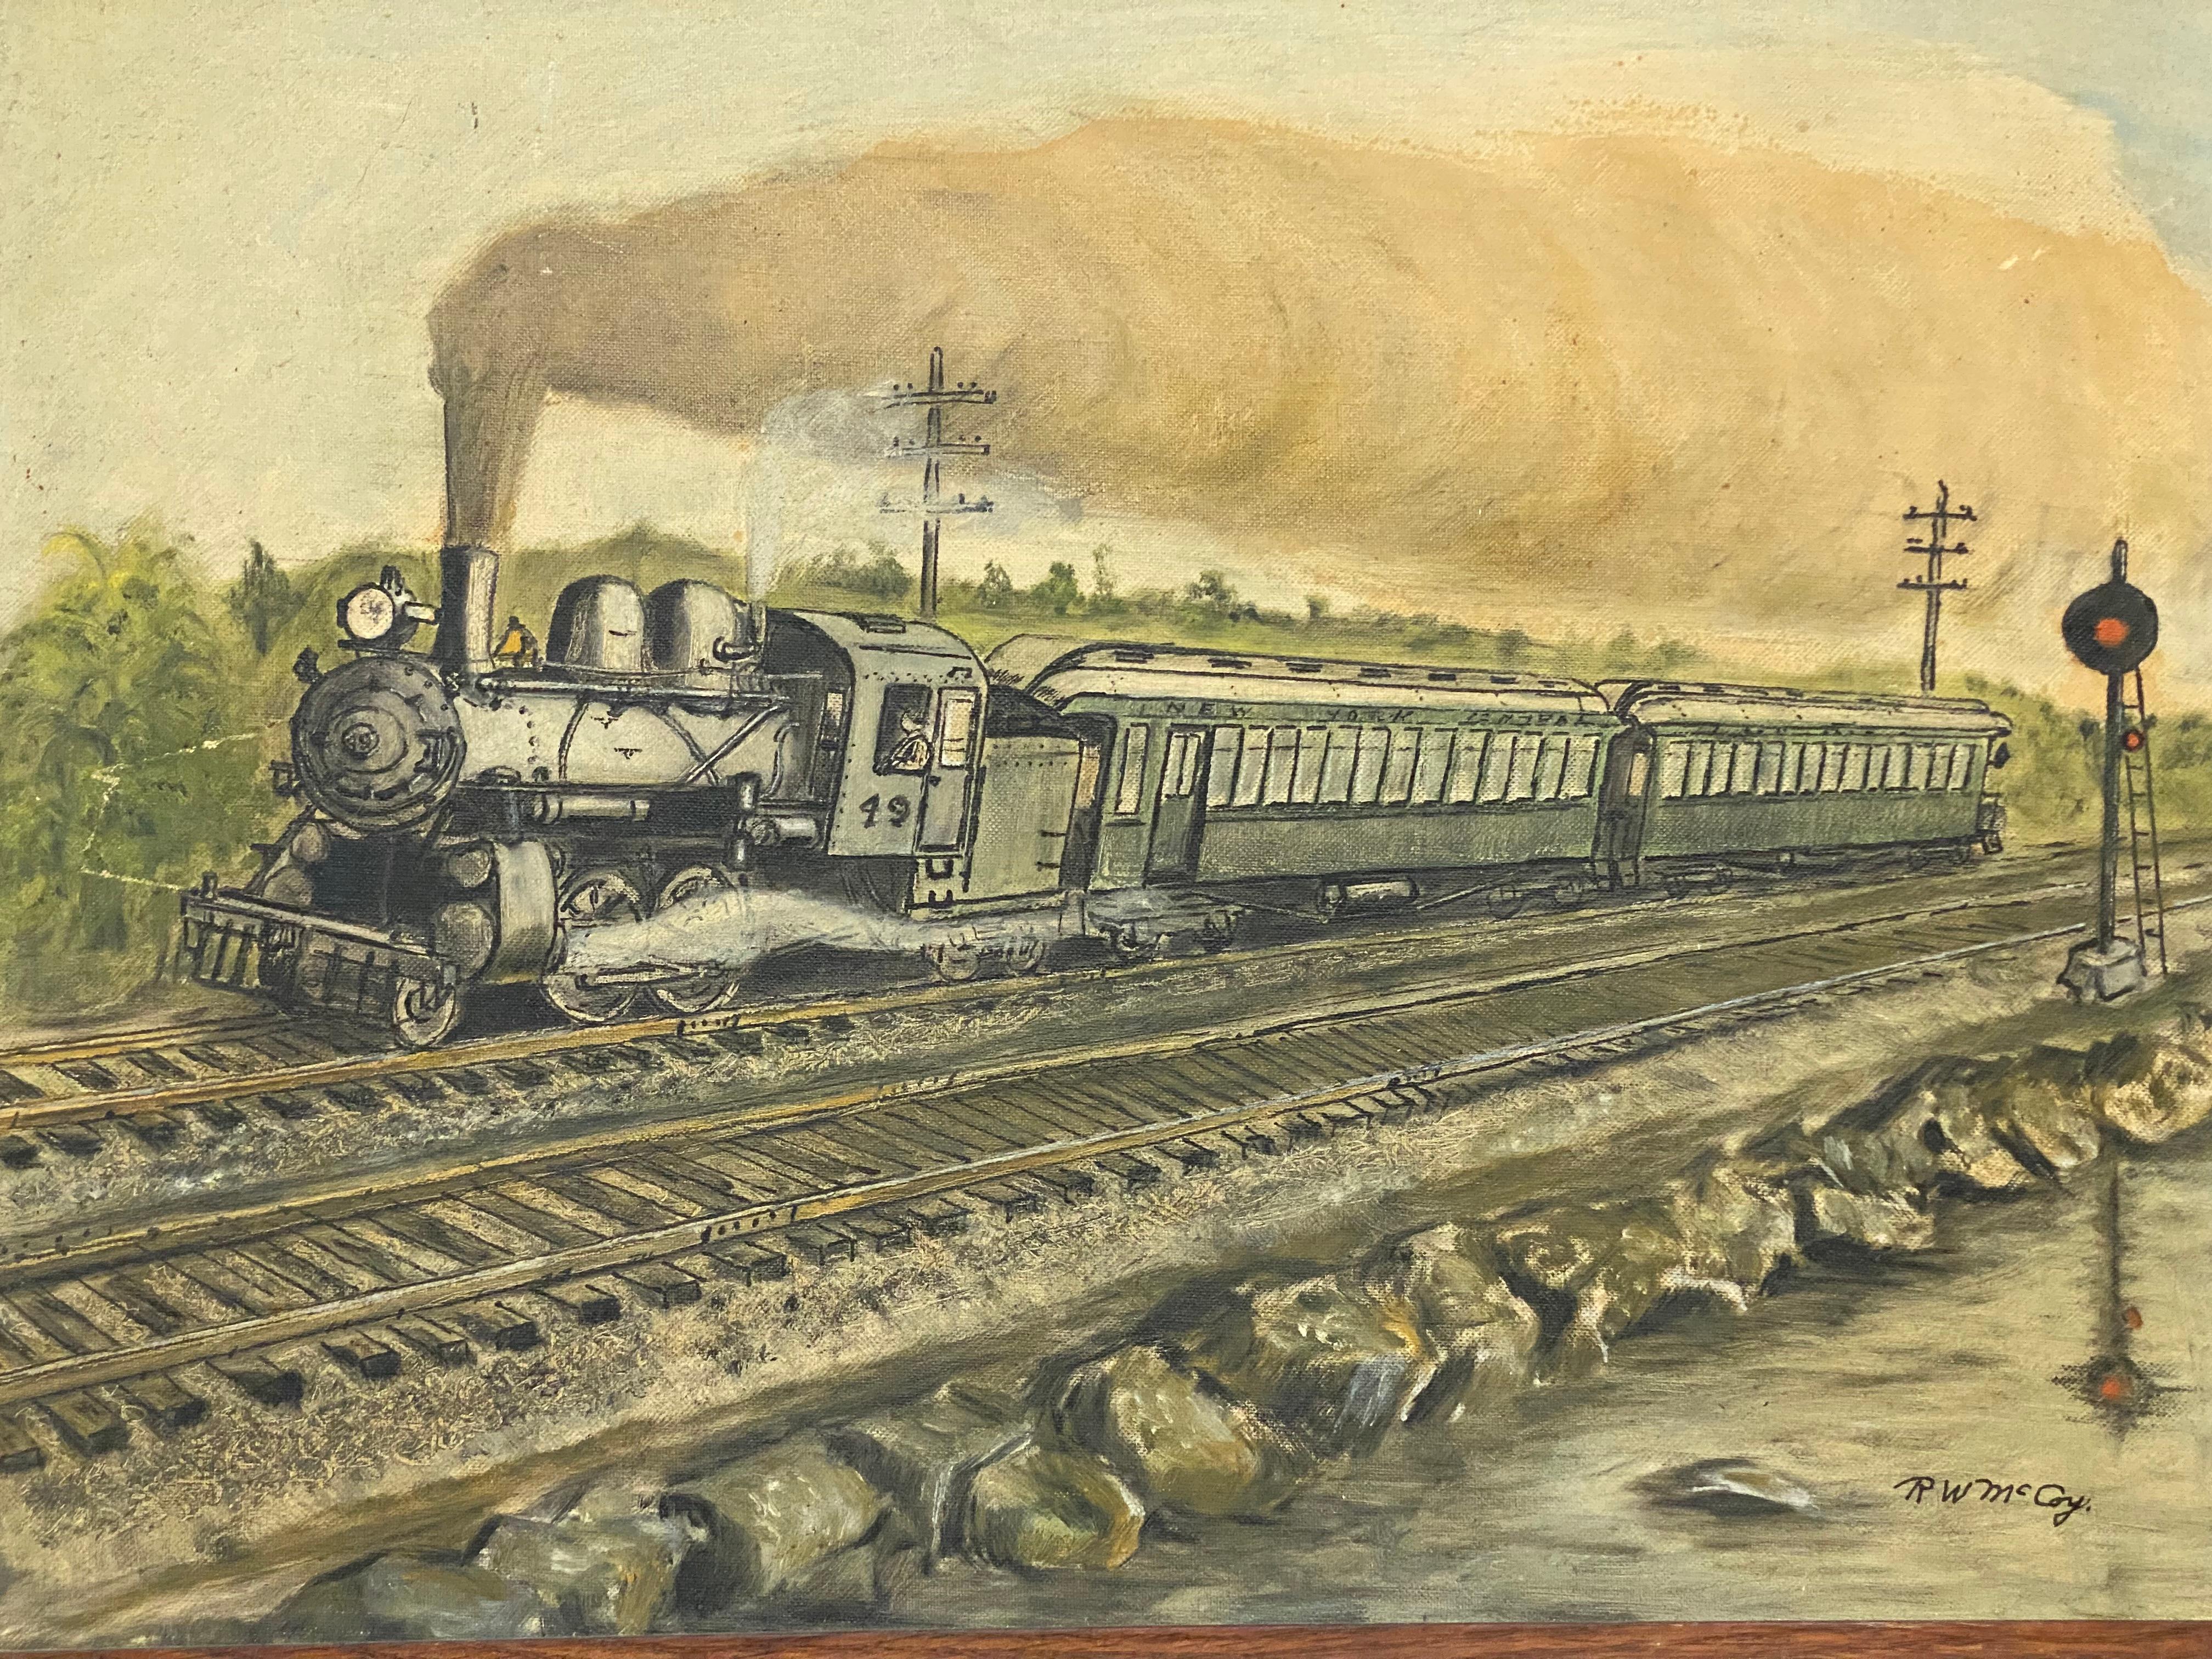 Steam locomotive with coal car and coaches. Signed R Wilson McCoy (1902-1961) lower right. McCoy was most famously known for his illustration work. Circa 1920-30. A nice bit of local down county Westchester, New York Central railroad history. Oil